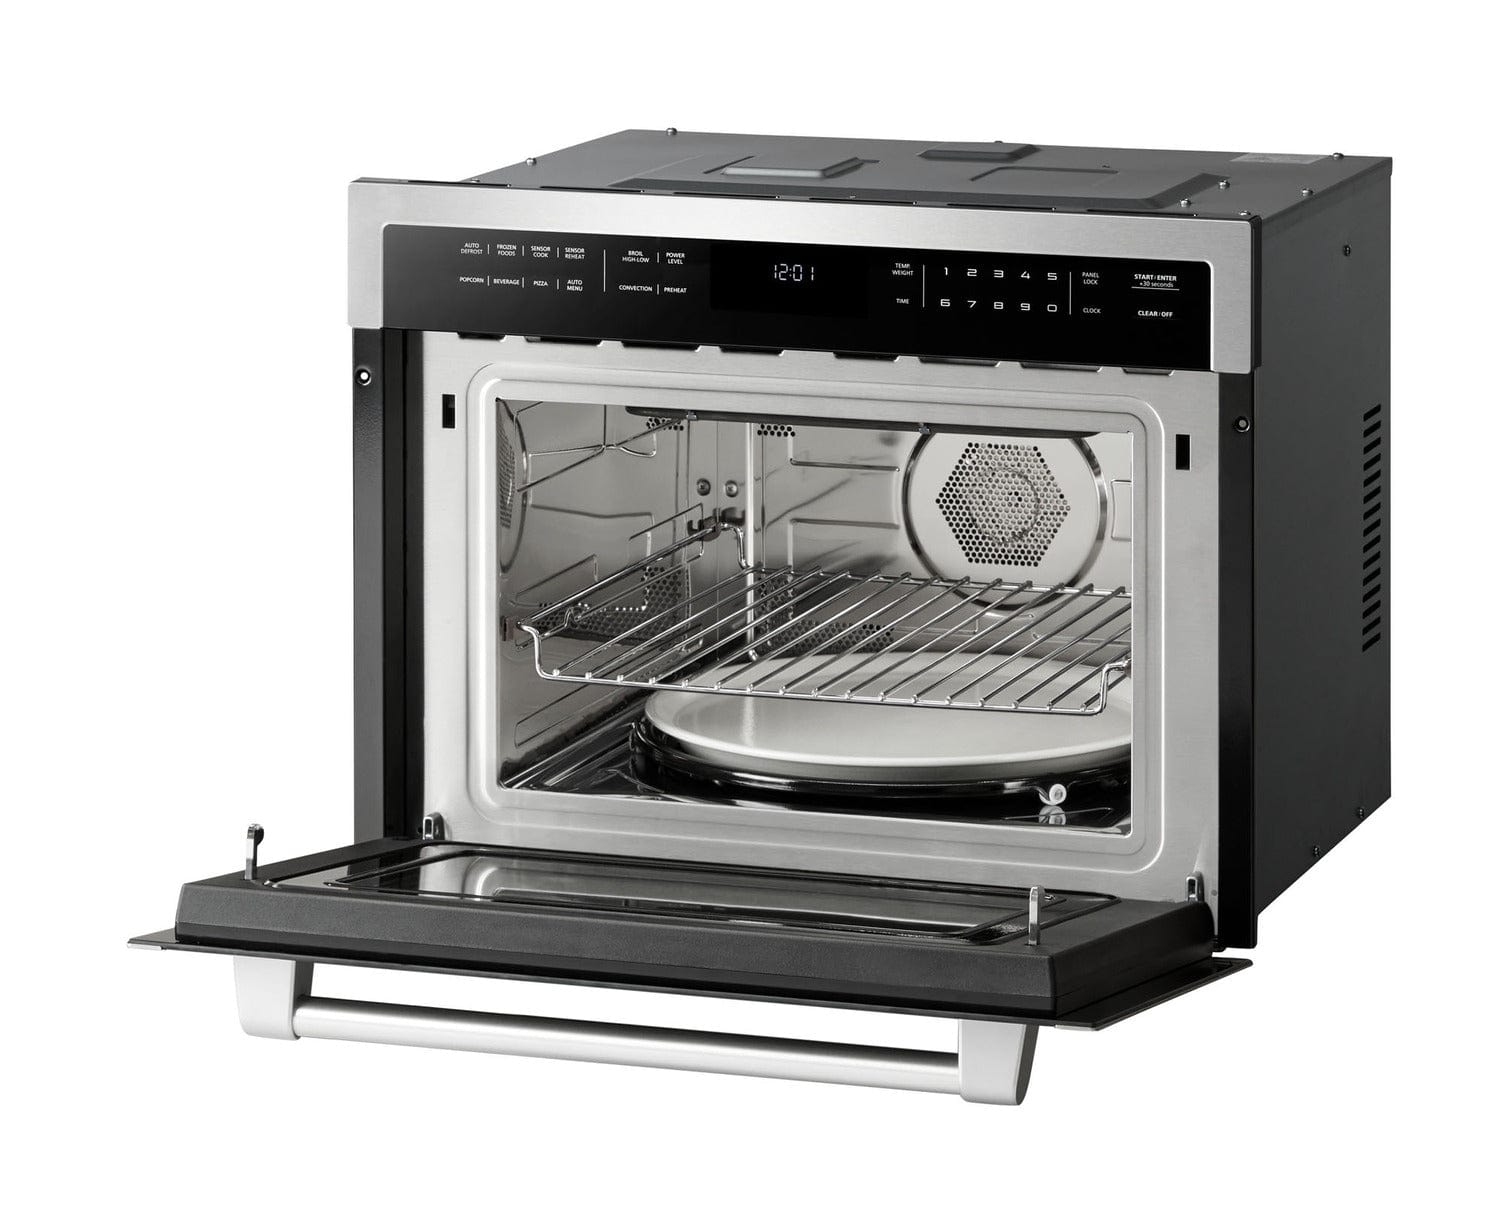 Thor Kitchen 24 Inch Microwave Oven In Stainless Steel TMO24 Microwaves TMO24 Luxury Appliances Direct